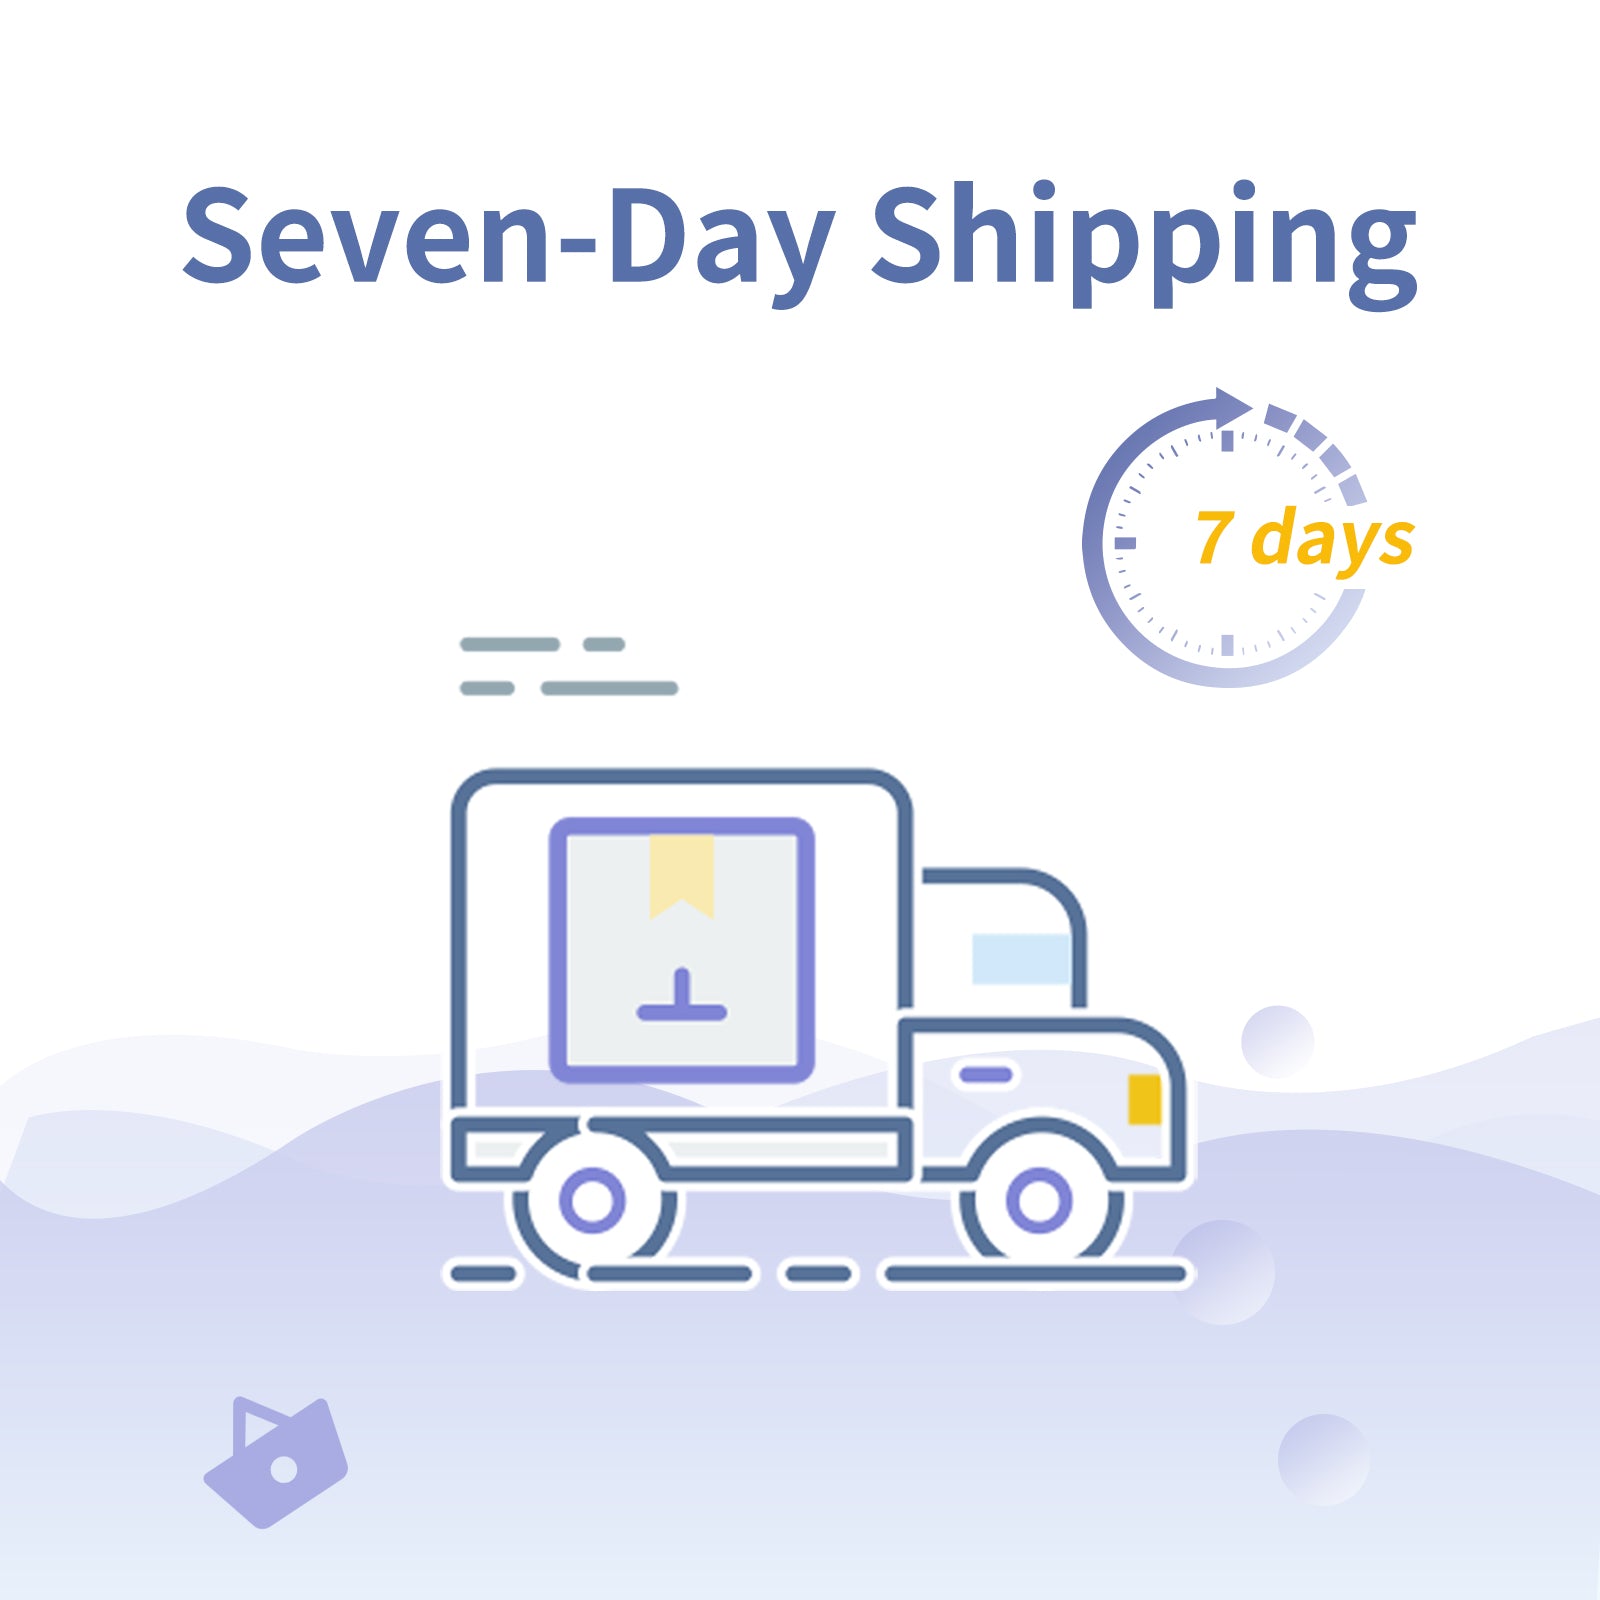 Seven- Day Shipping service